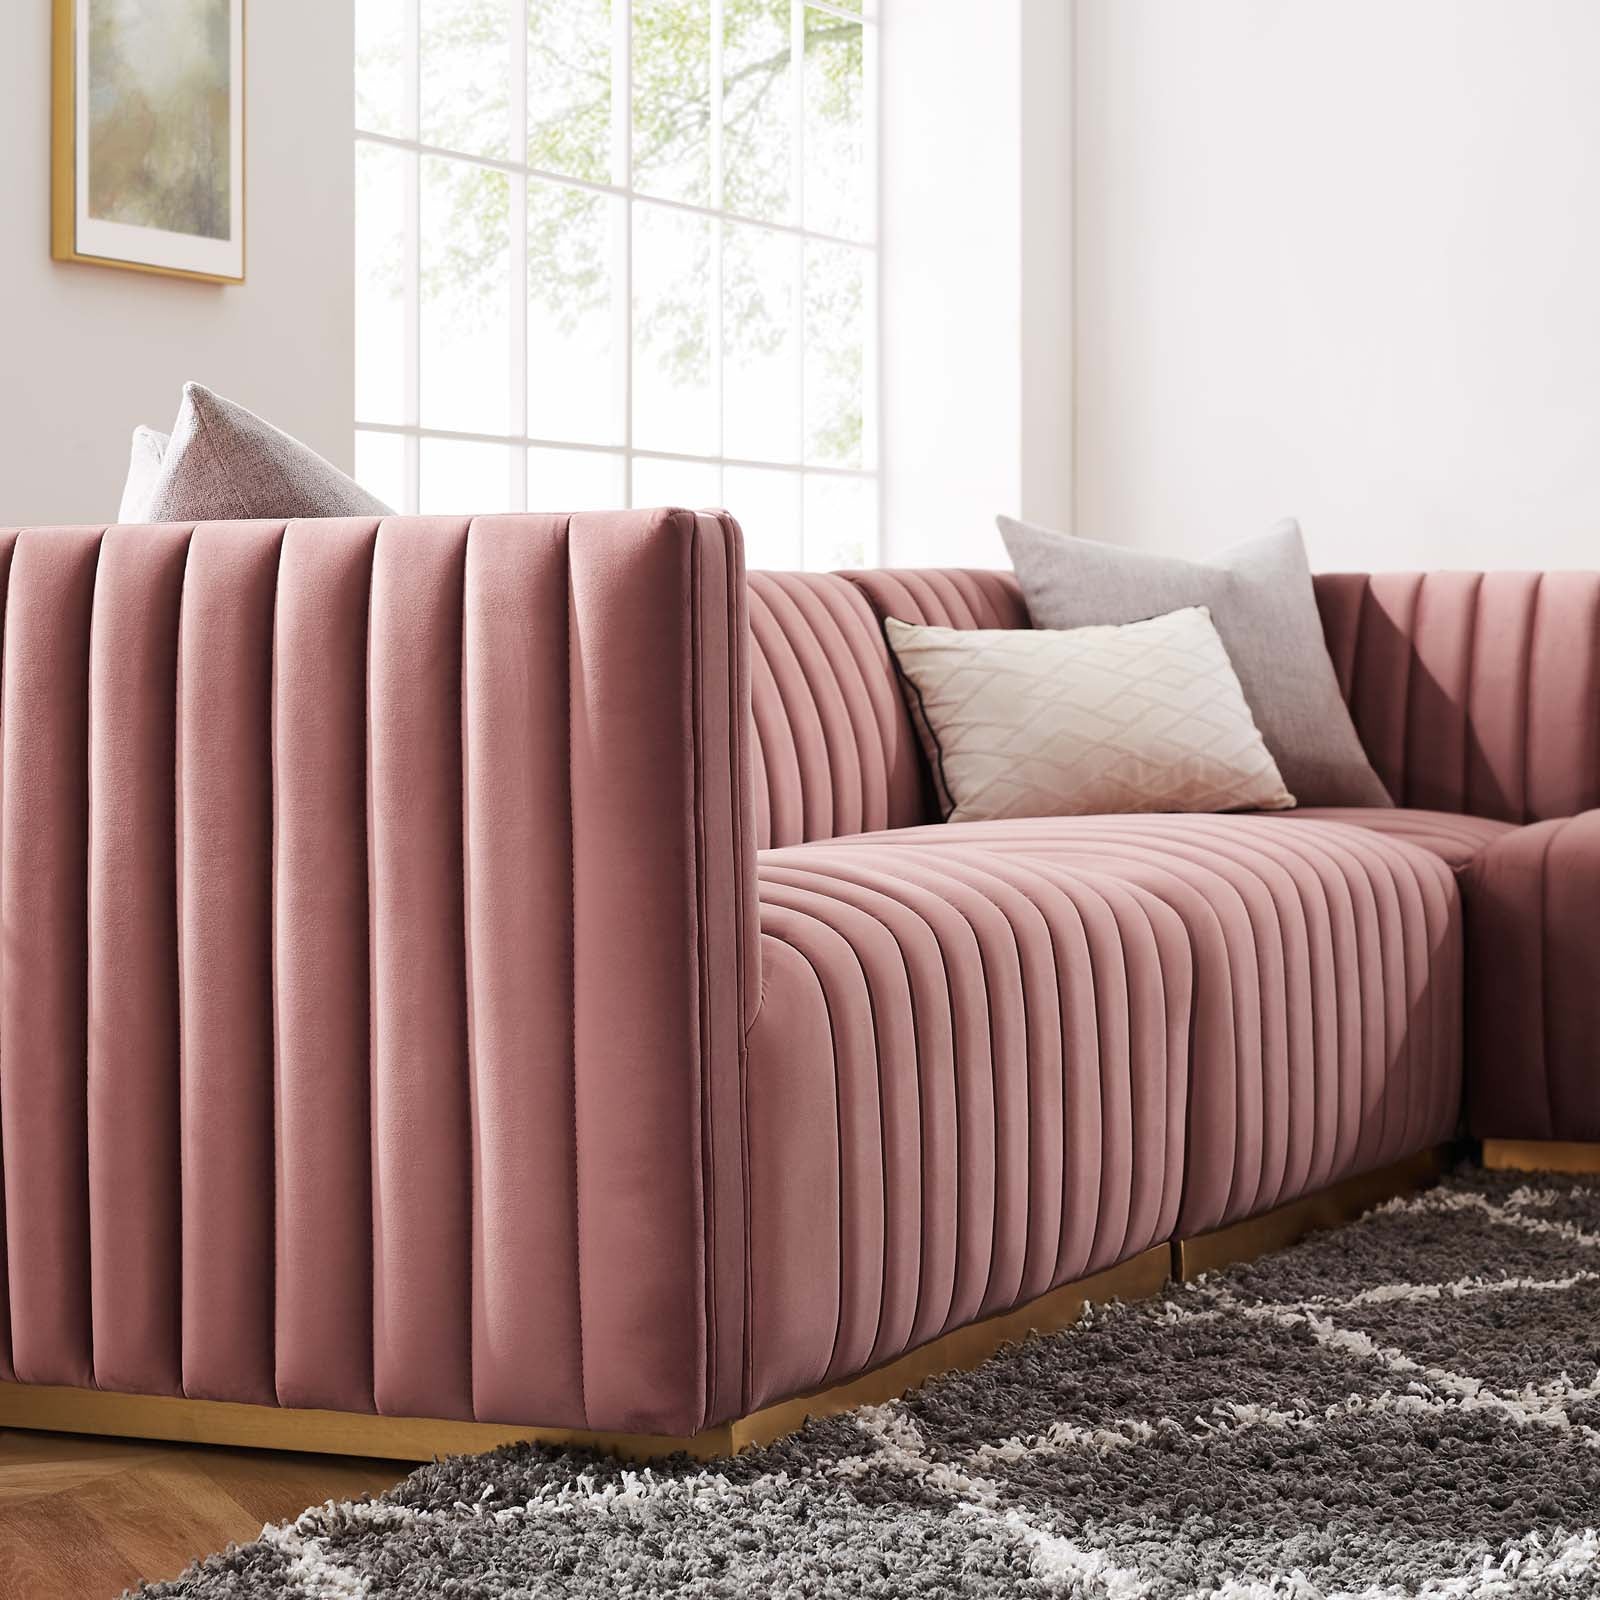 Modway Sectional Sofas - Conjure Channel Tufted Performance Velvet 5 Piece Sectional Sofa Gold | Dusty Rose